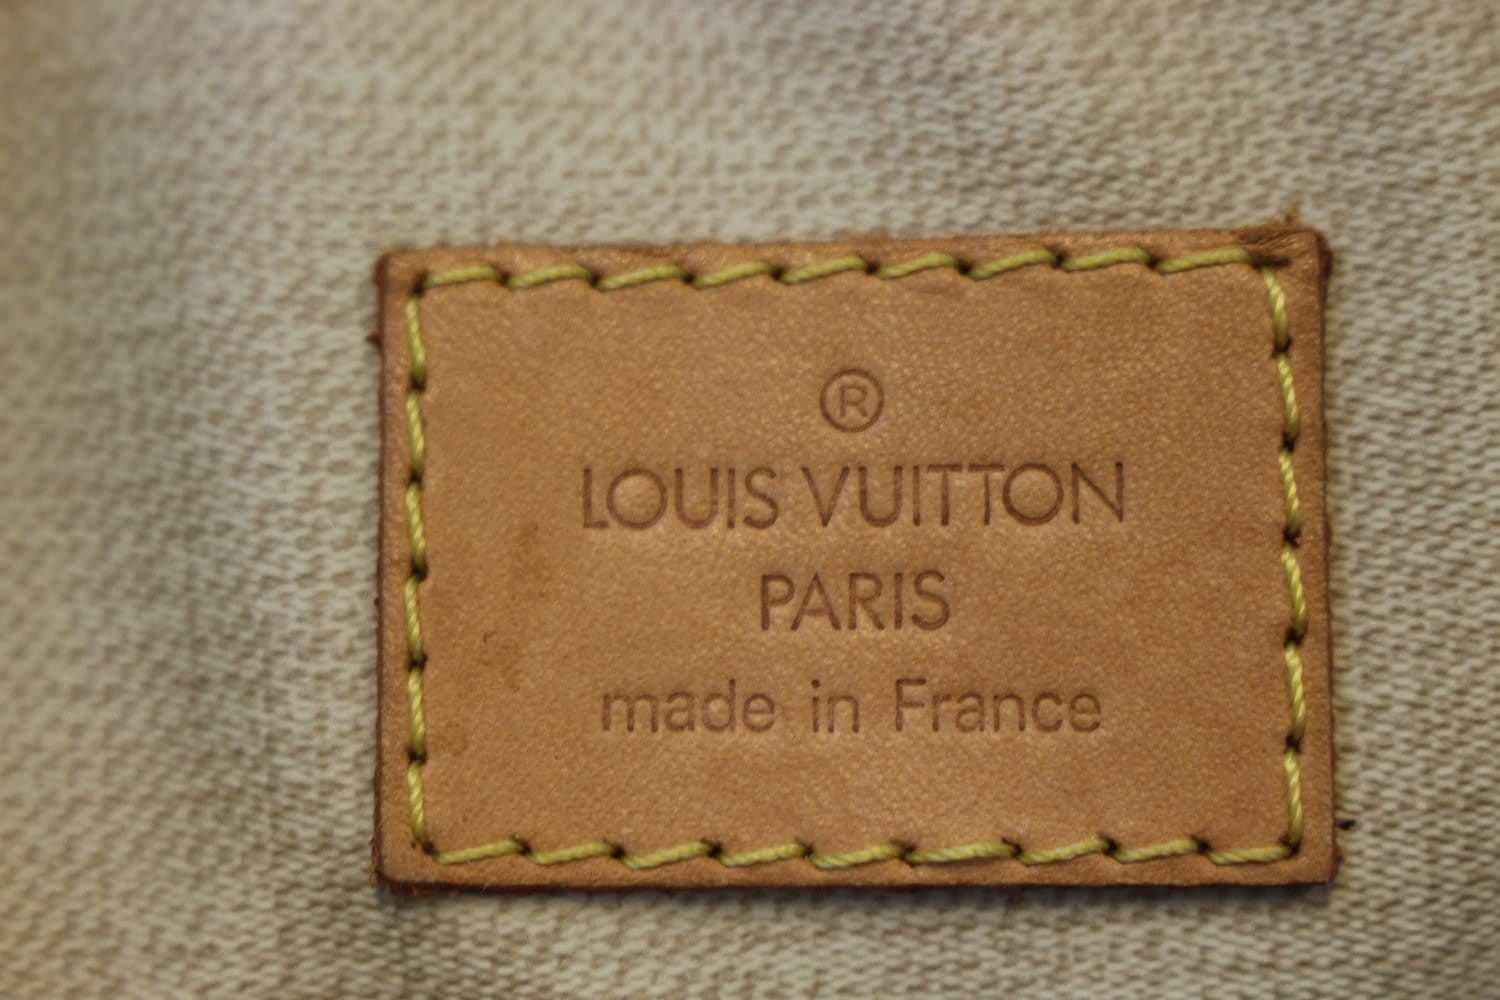 For Her – Tagged louis vuitton – Freed's Bakery